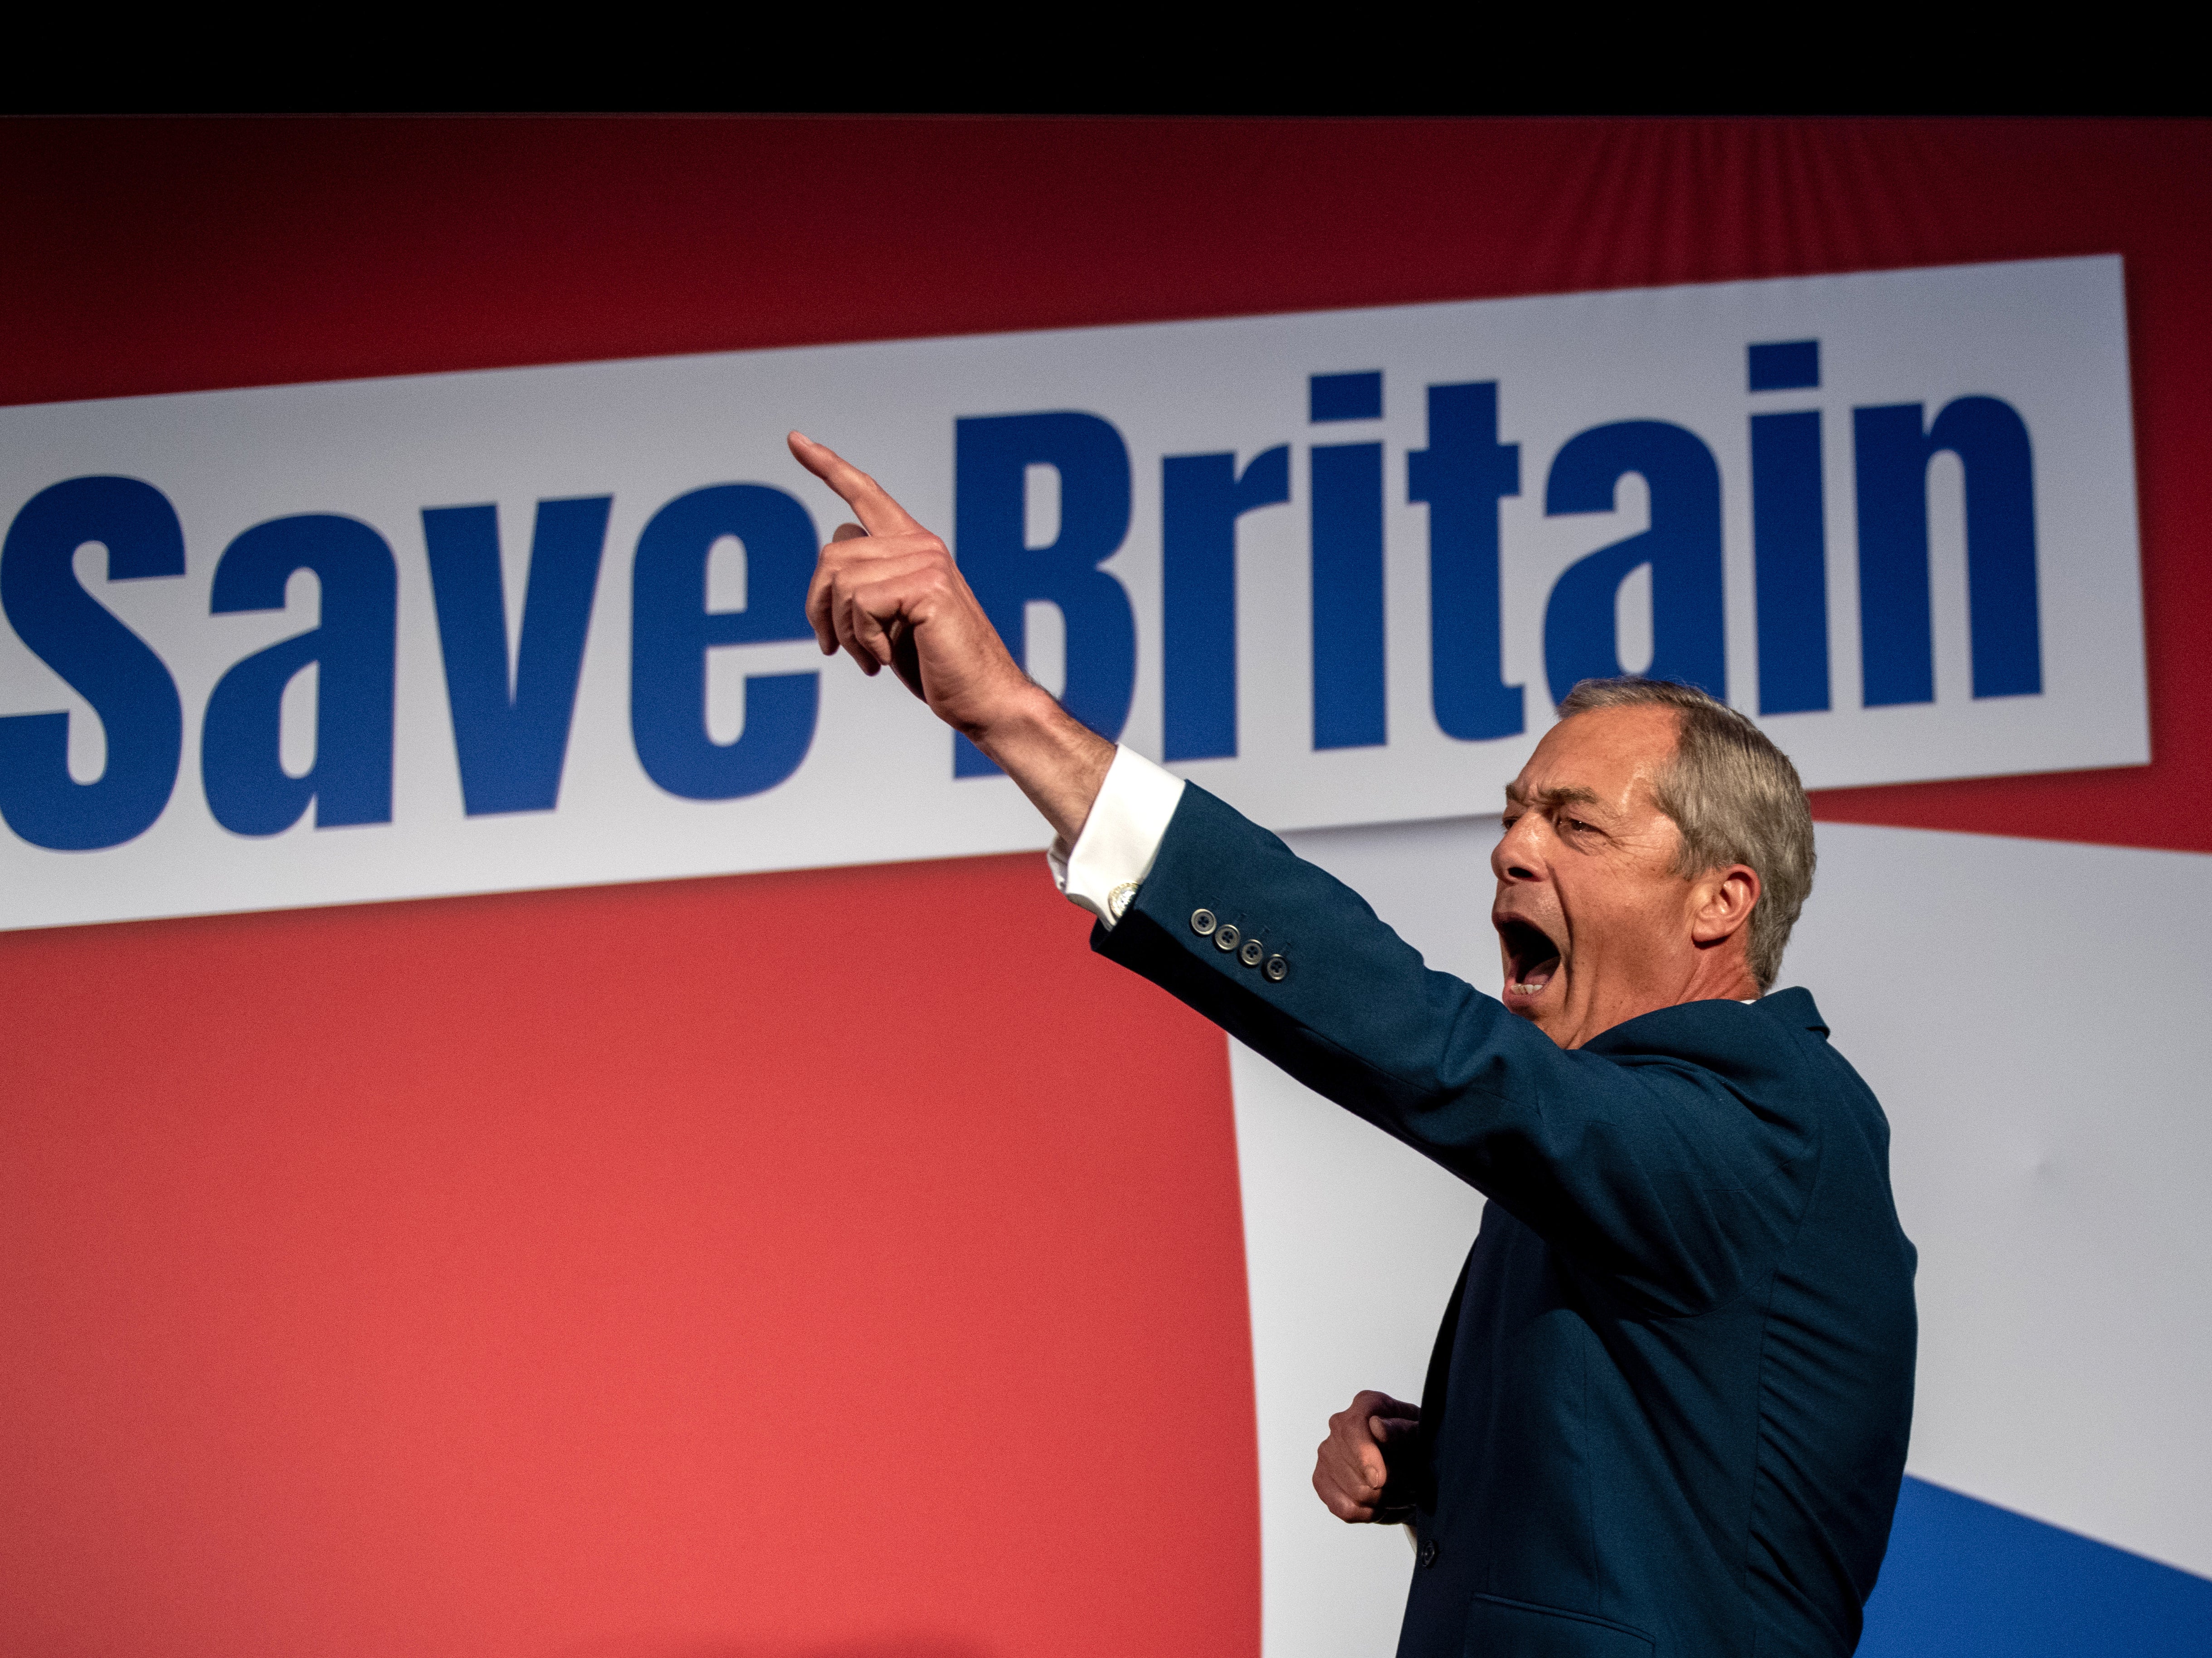 Nigel Farage’s party is no longer banging on about the EU – it is a bin for protest votes